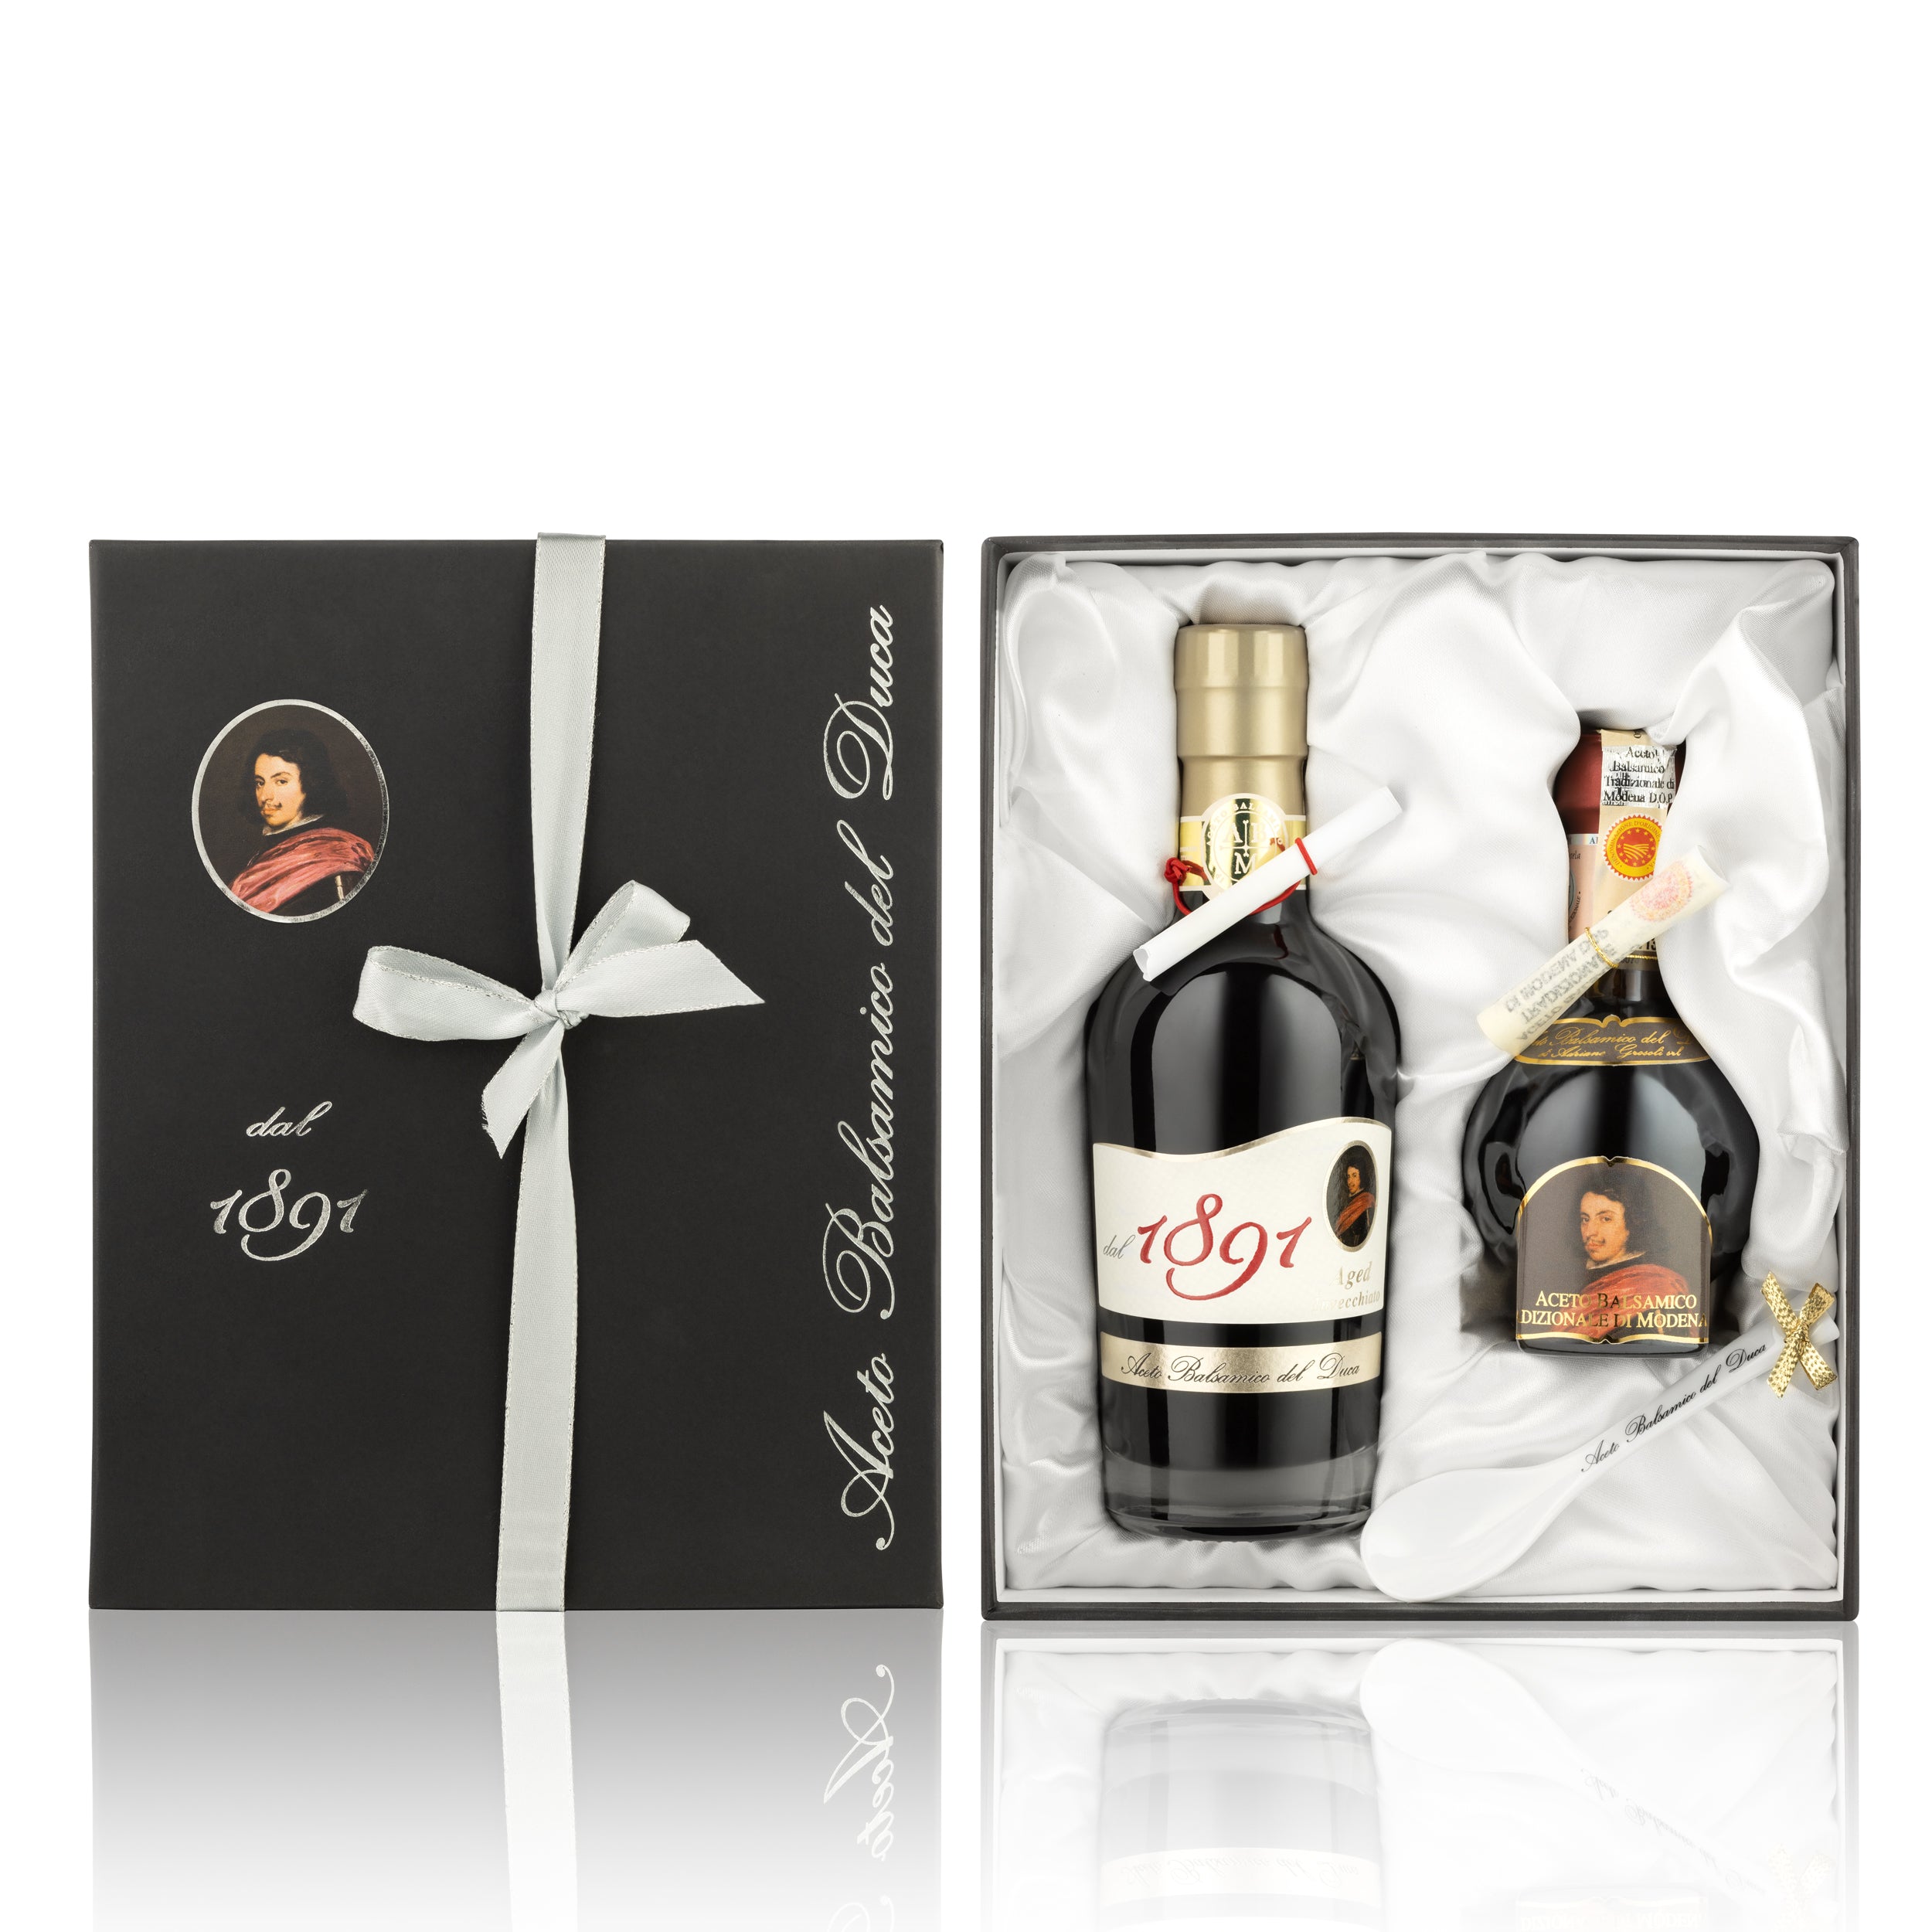 Balsamic Vinegar of Modena and Traditional Balsamic Vinegar of Modena